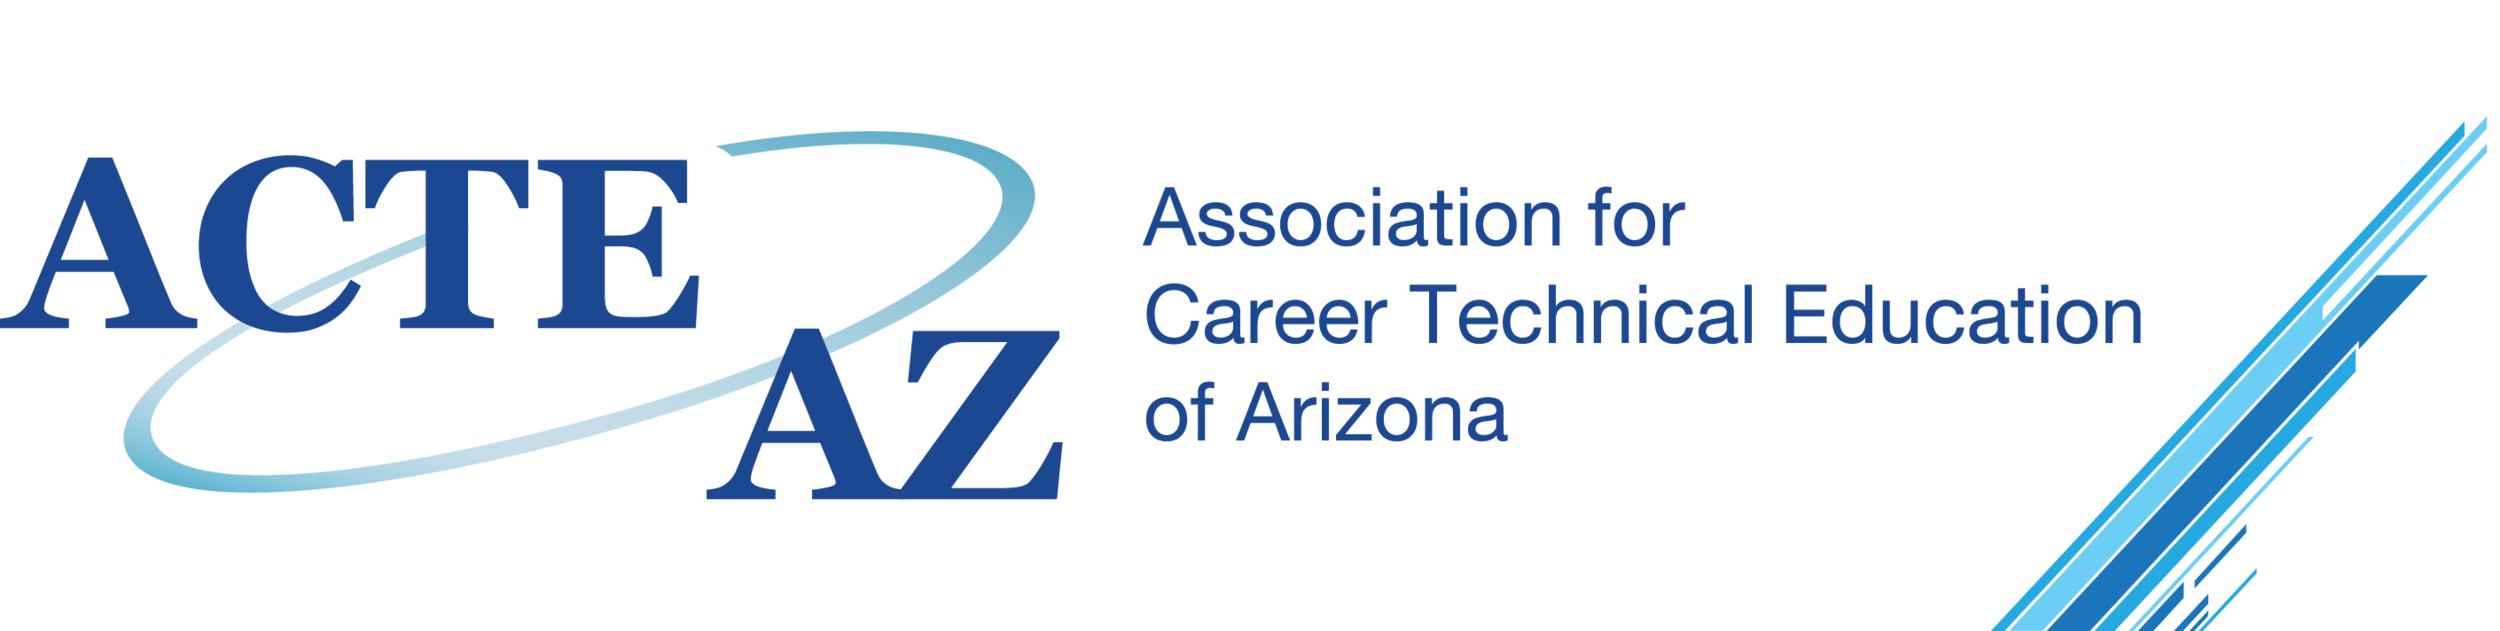 Association for Career Technical Education of Arizona .png